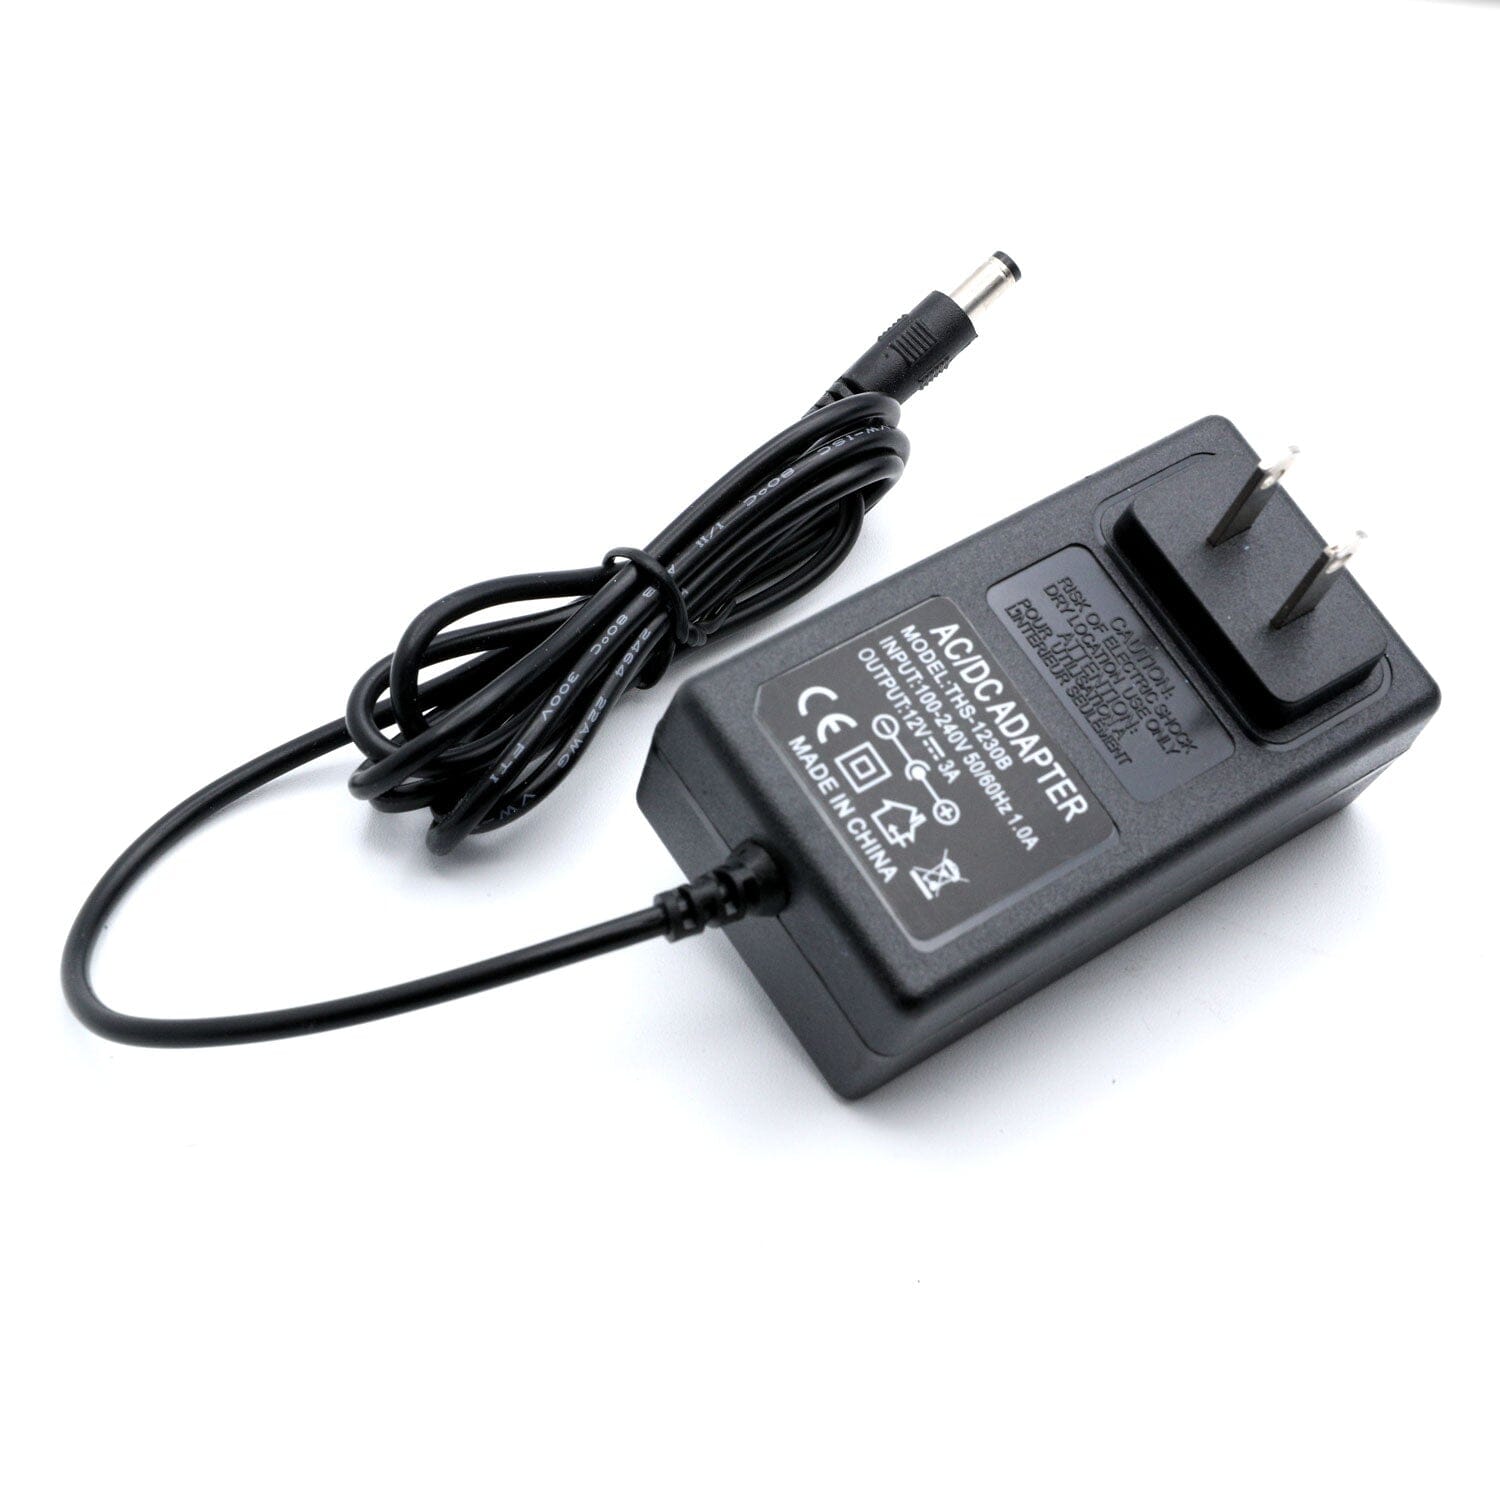 12 Volt Power Adapter for Rugged Radios and other Mobile Radios